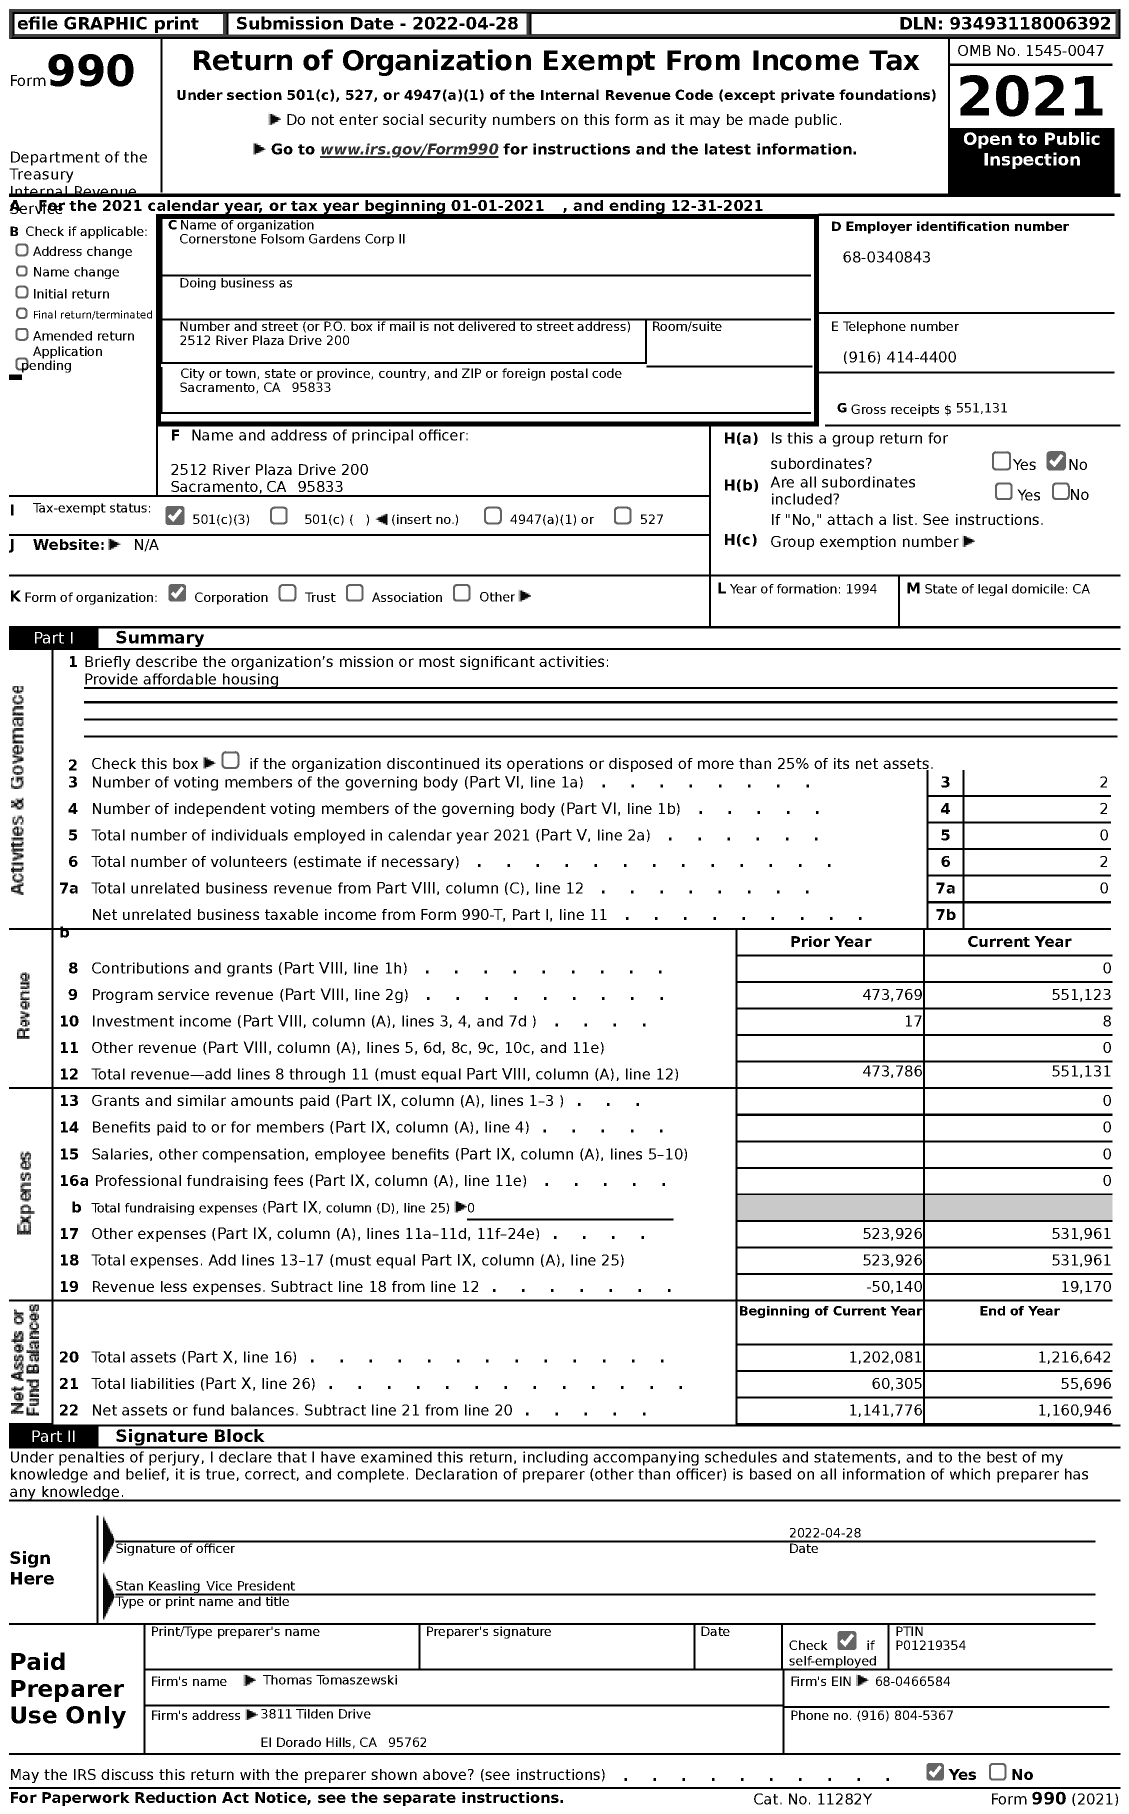 Image of first page of 2021 Form 990 for Cornerstone Folsom Gardens Corporation II